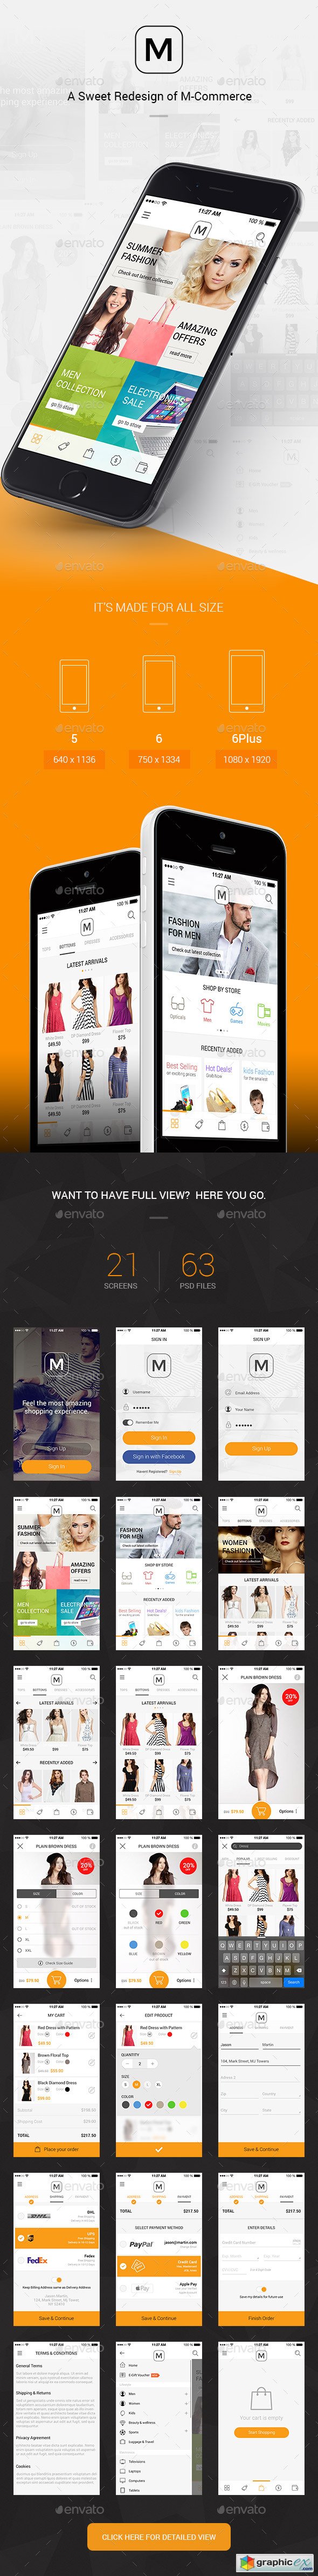 M - A Sweet Redesign Of M-Commerce